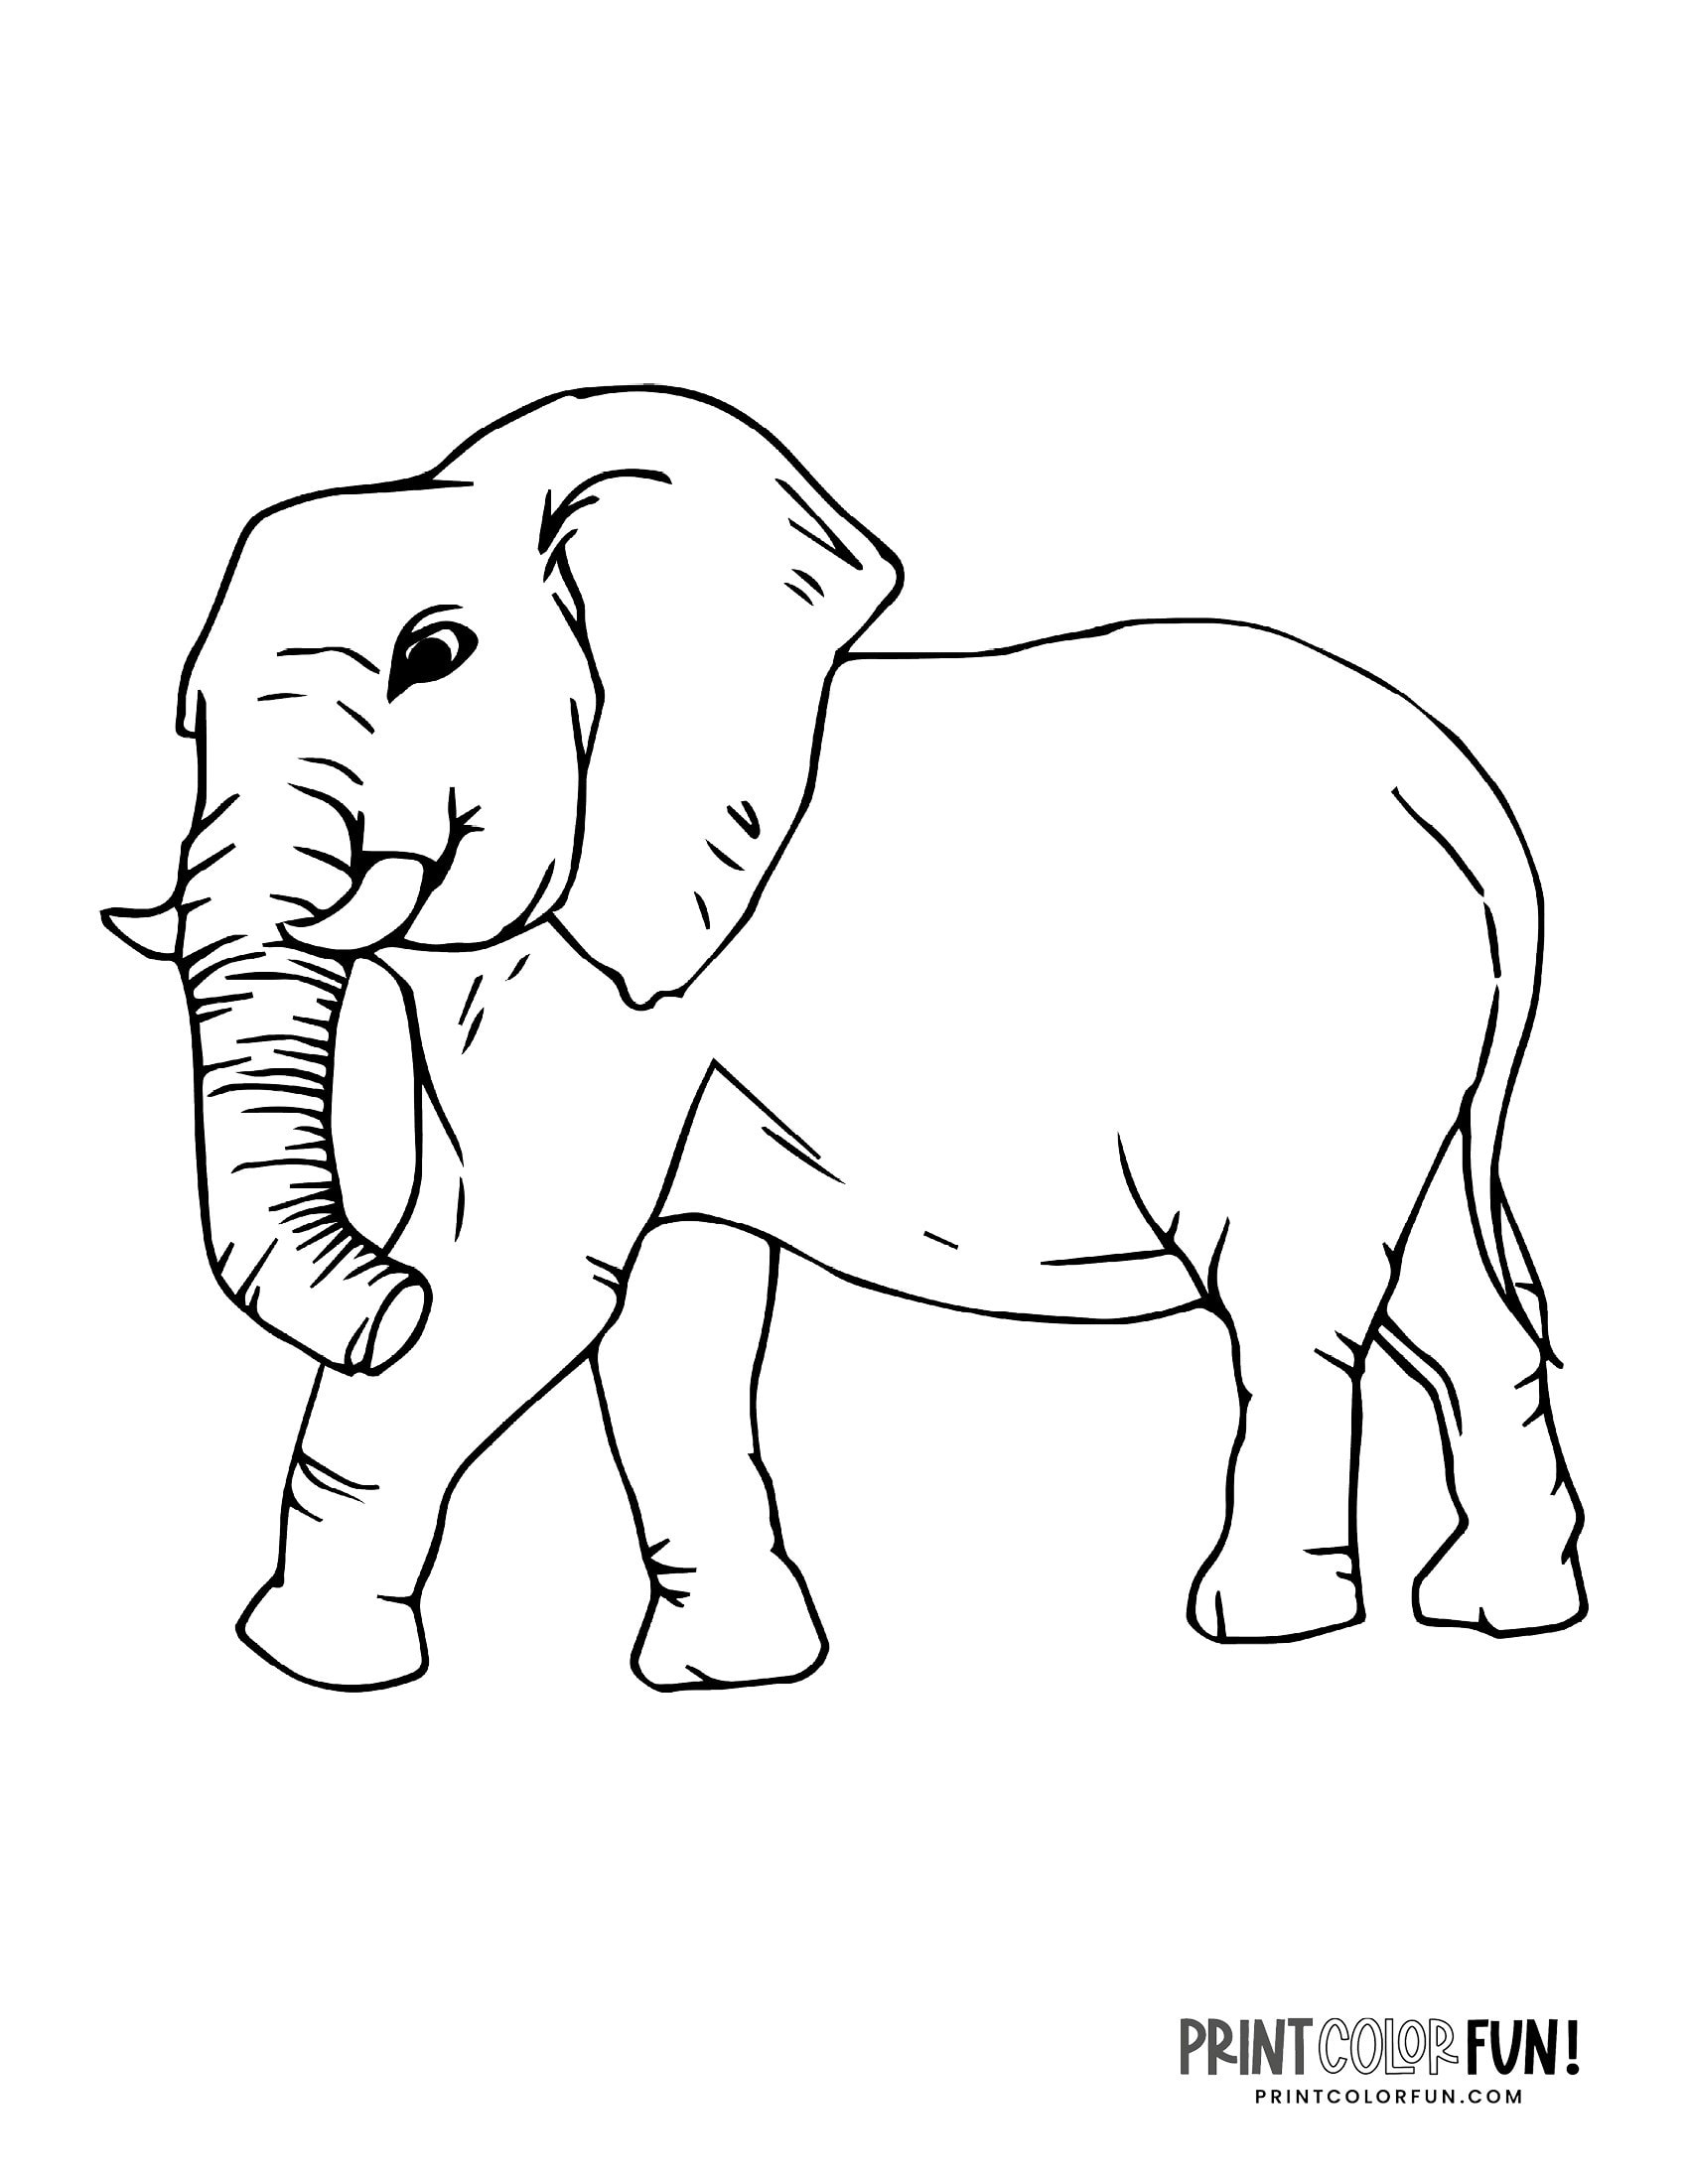 6 realistic elephant coloring pages to print - Print Color ...